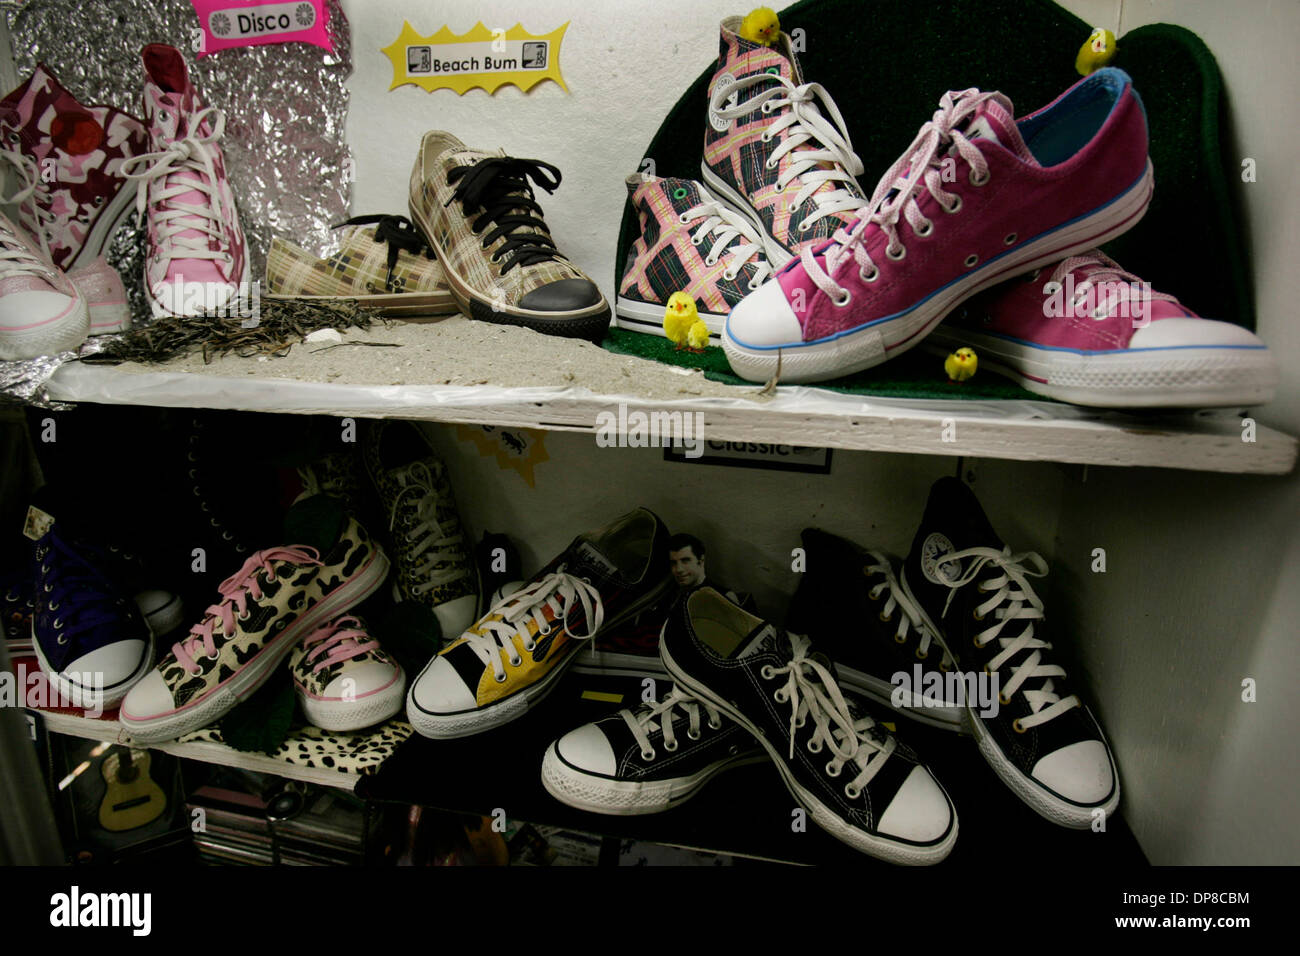 where to buy converse shoes in san diego